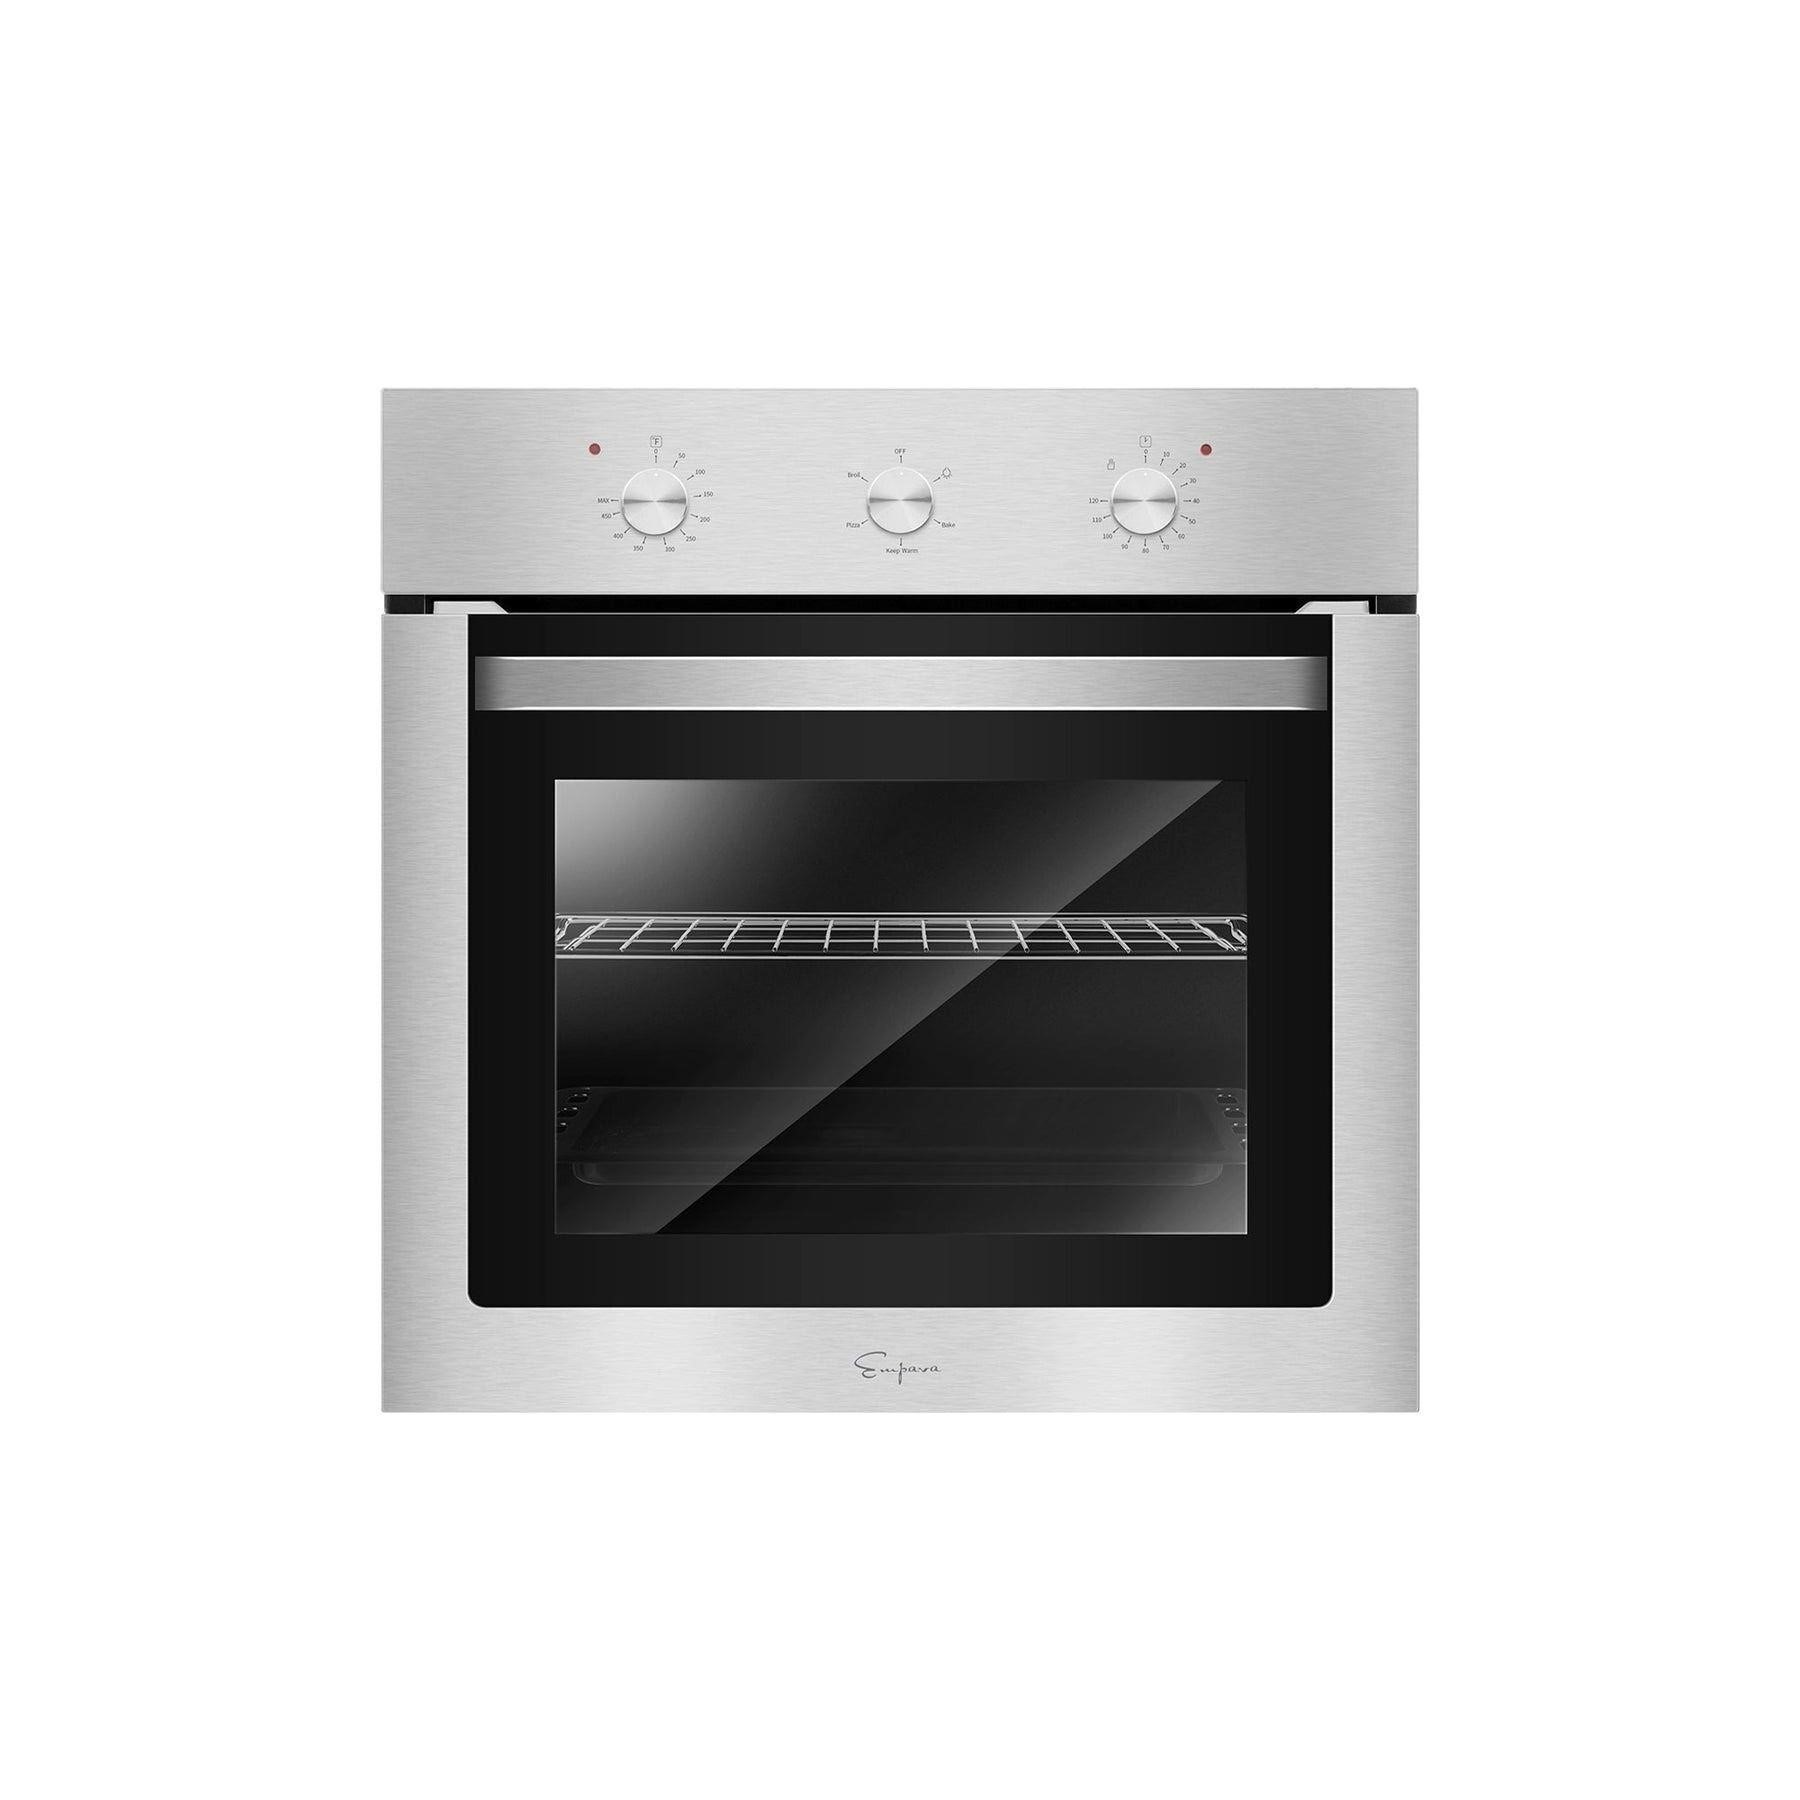 $575 Empava Wall Oven-small dent